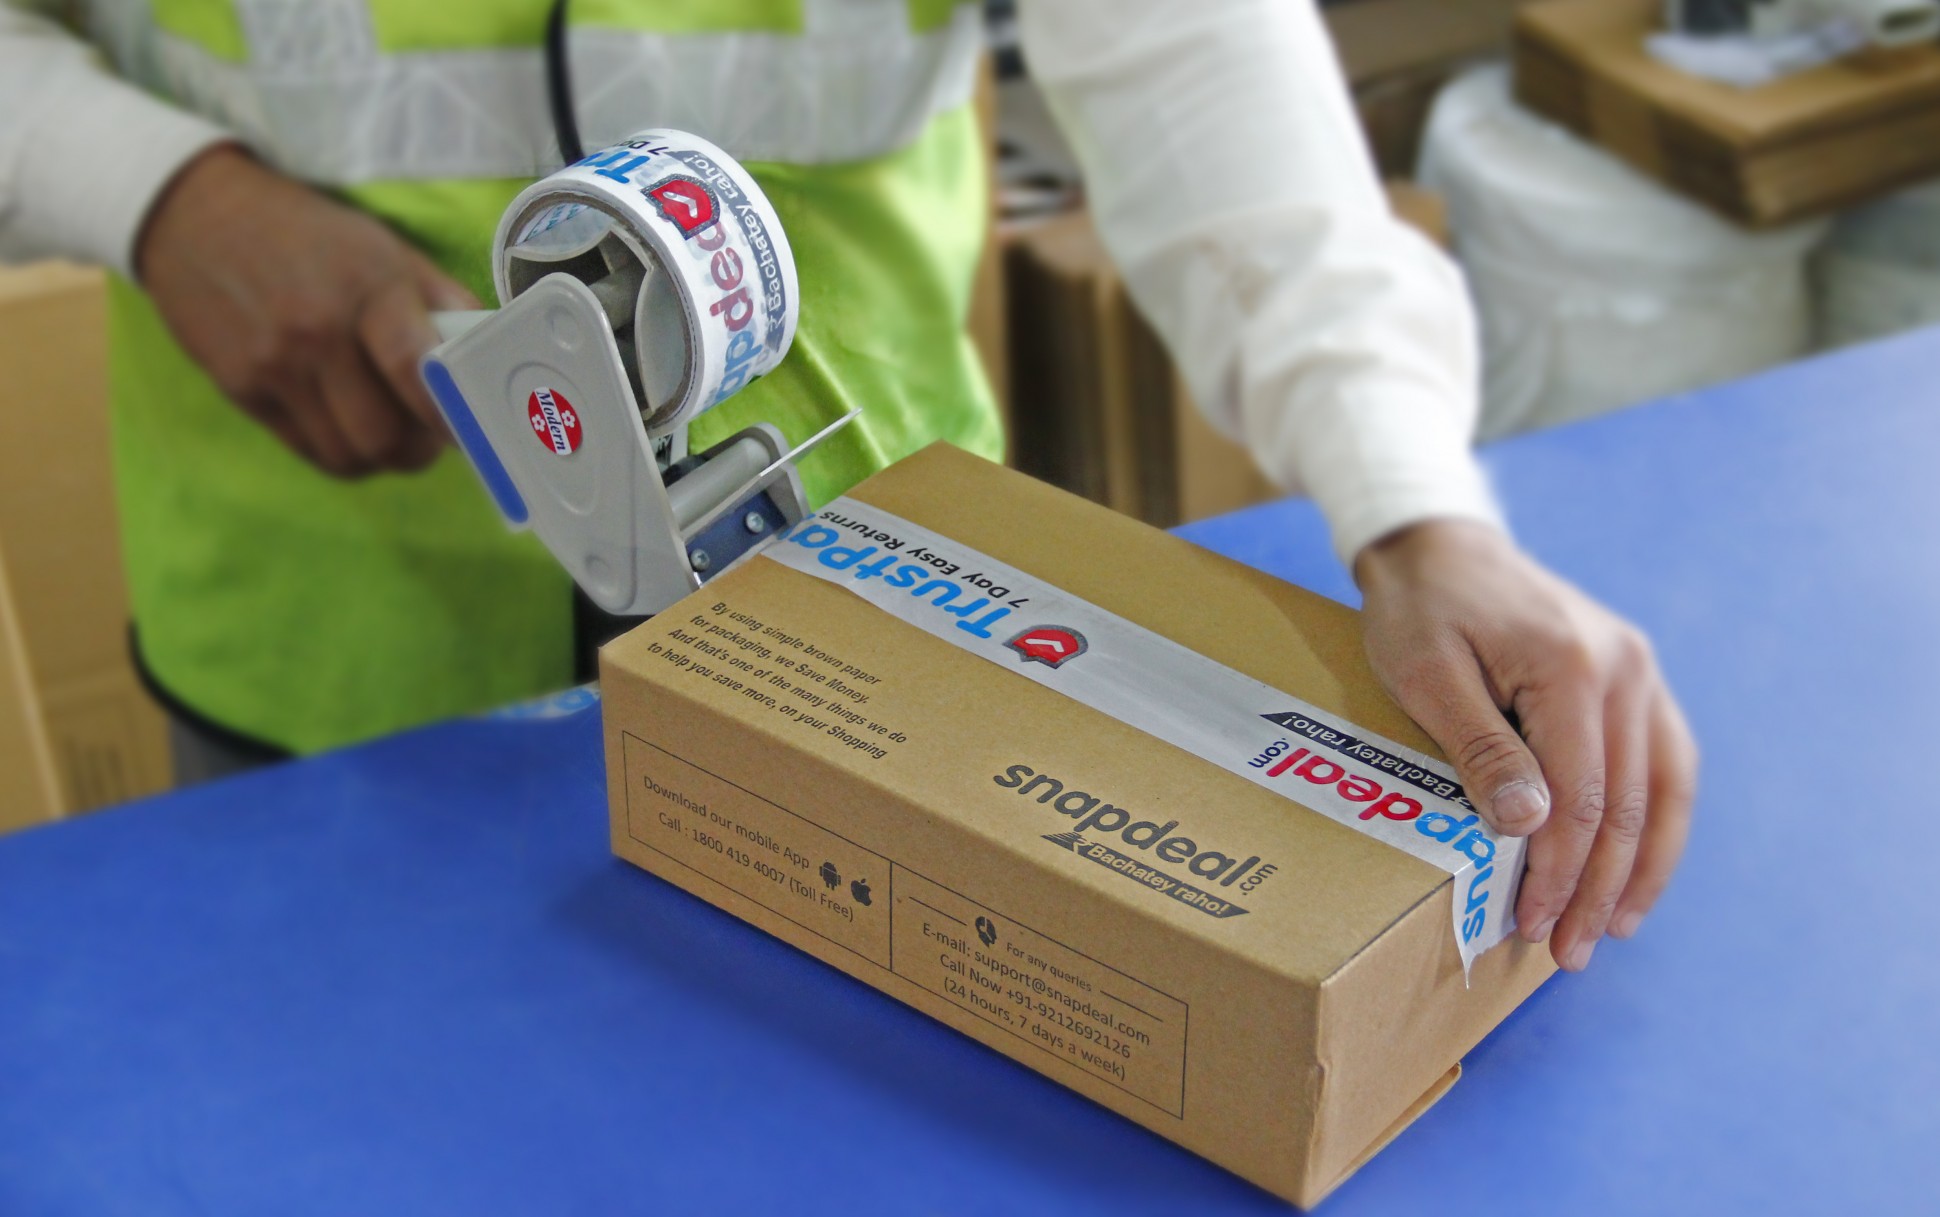 Snapdeal brings products to you at  lightening speed